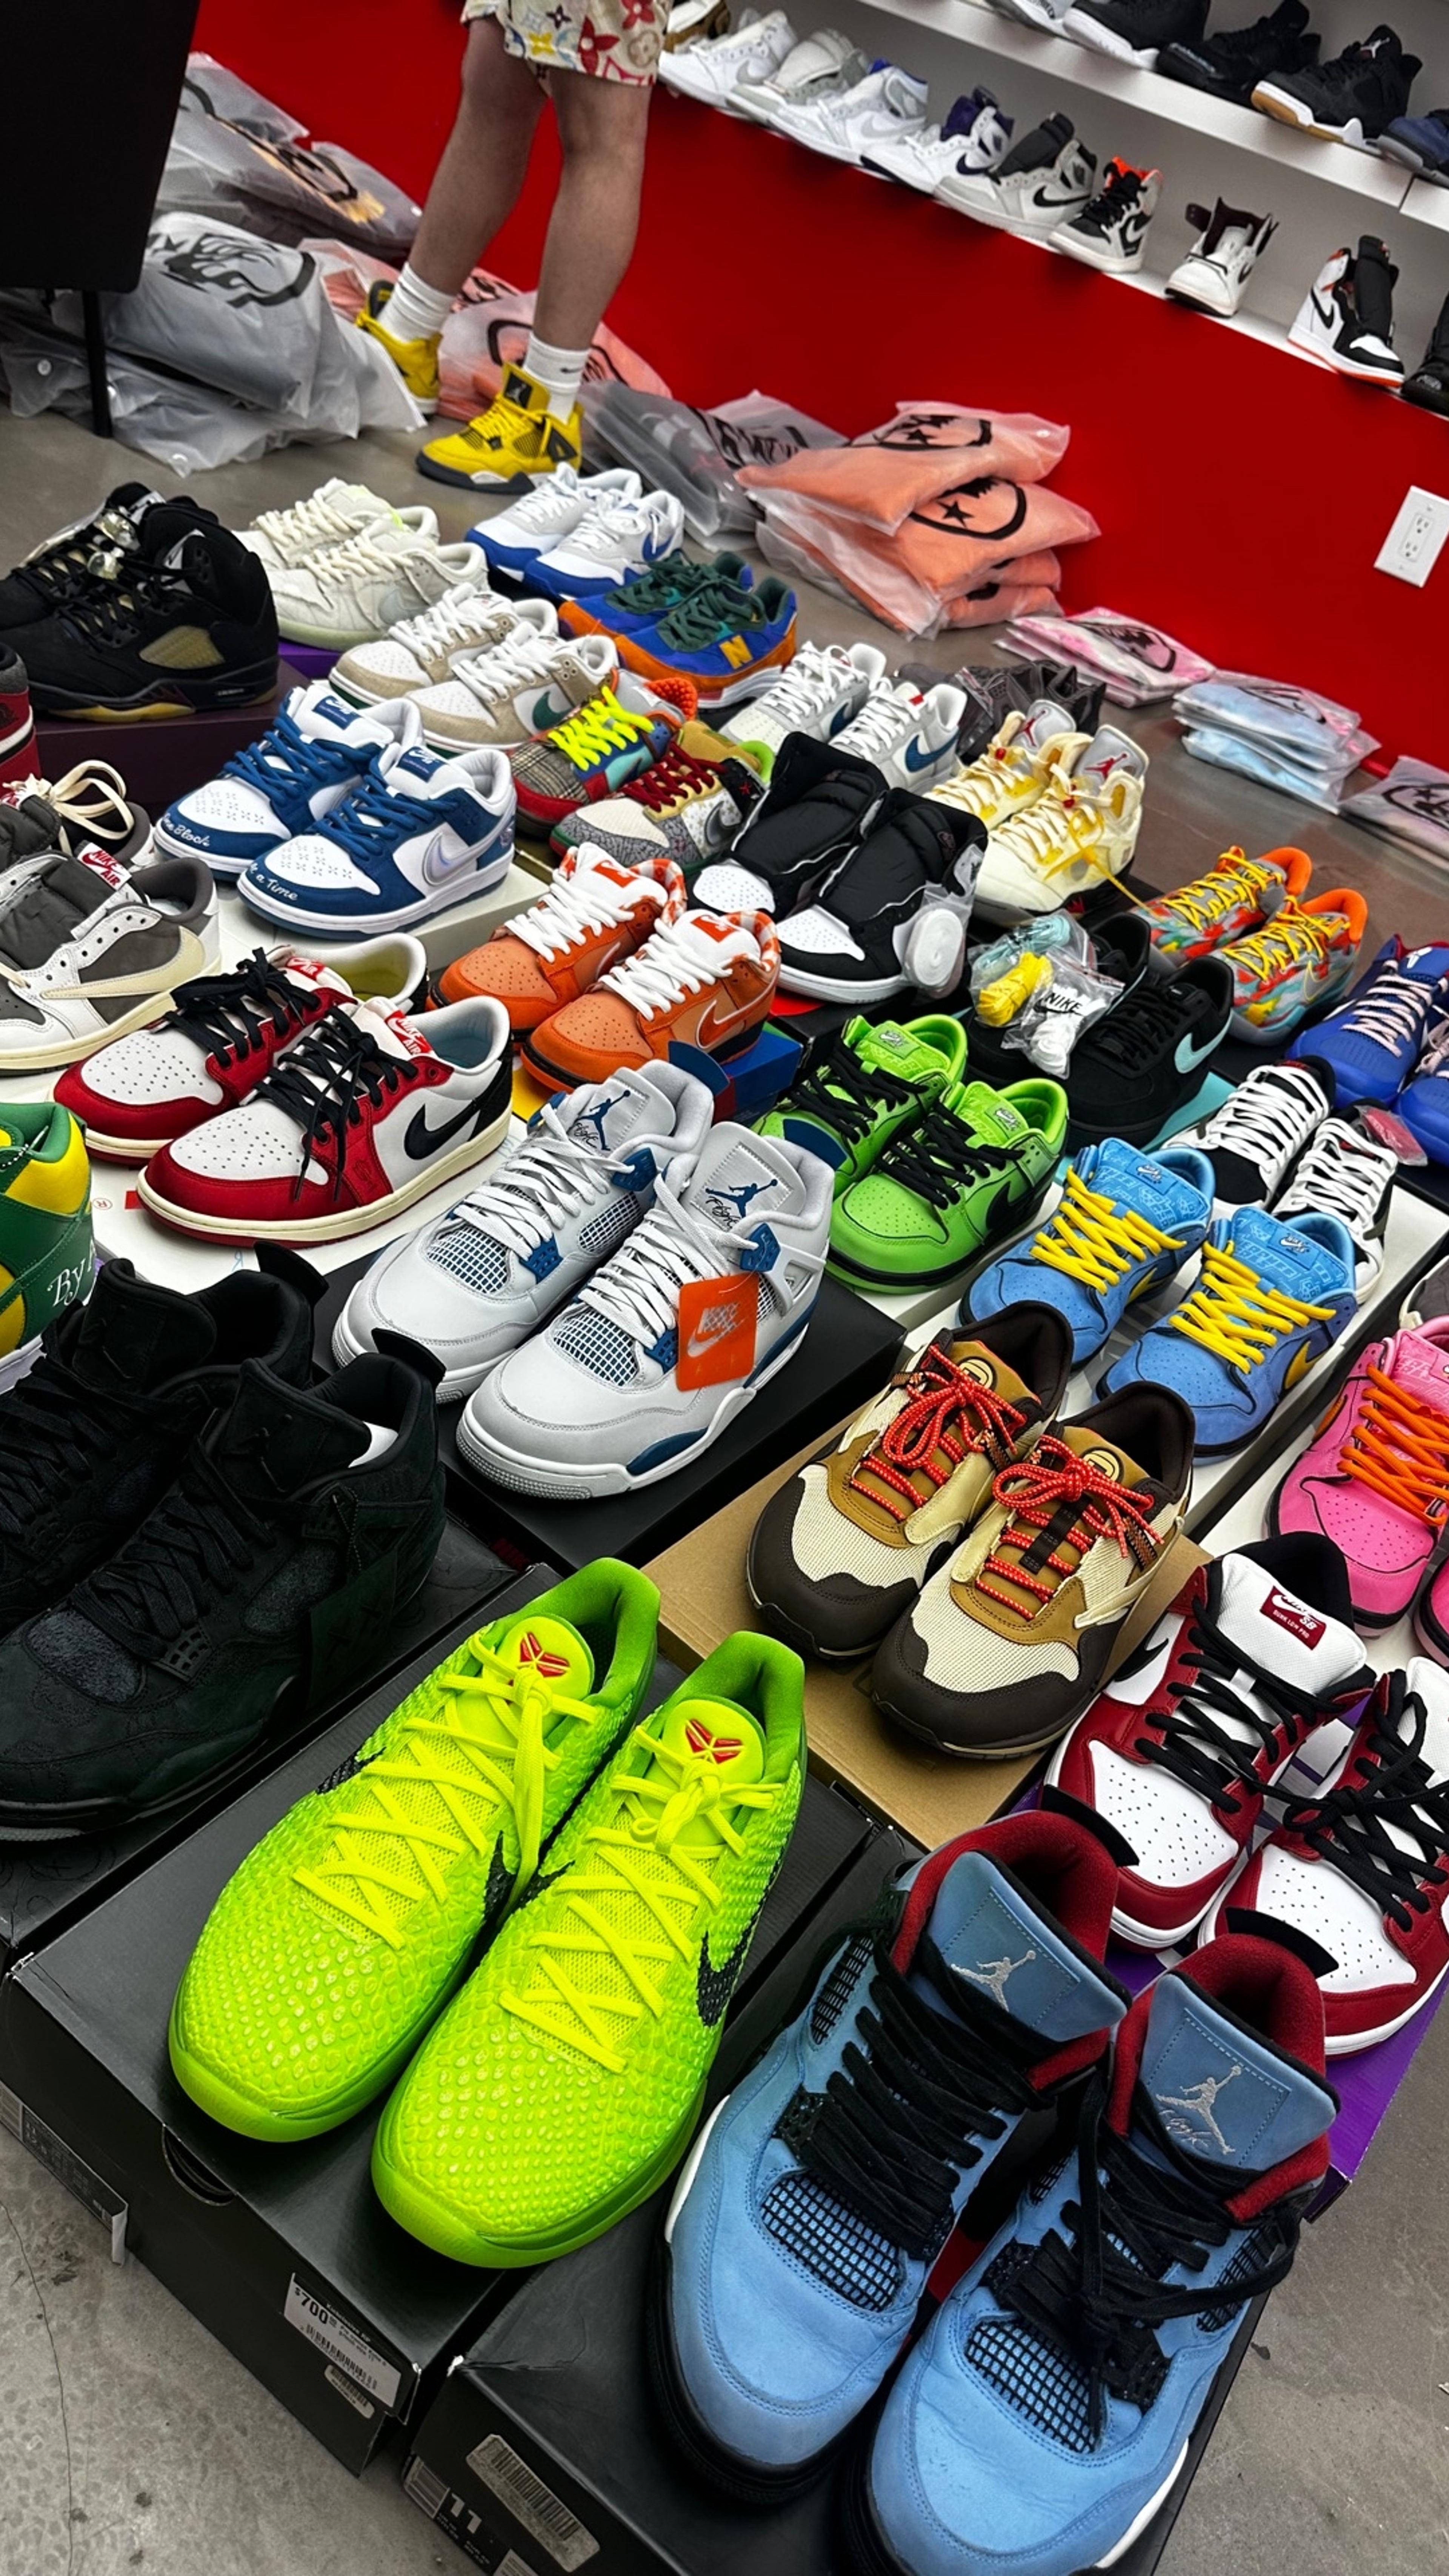 Preview image for the show titled "Quick Sneakers $1 auctions! EVERYTHING MUST GO! " at Today @ 11:30 PM